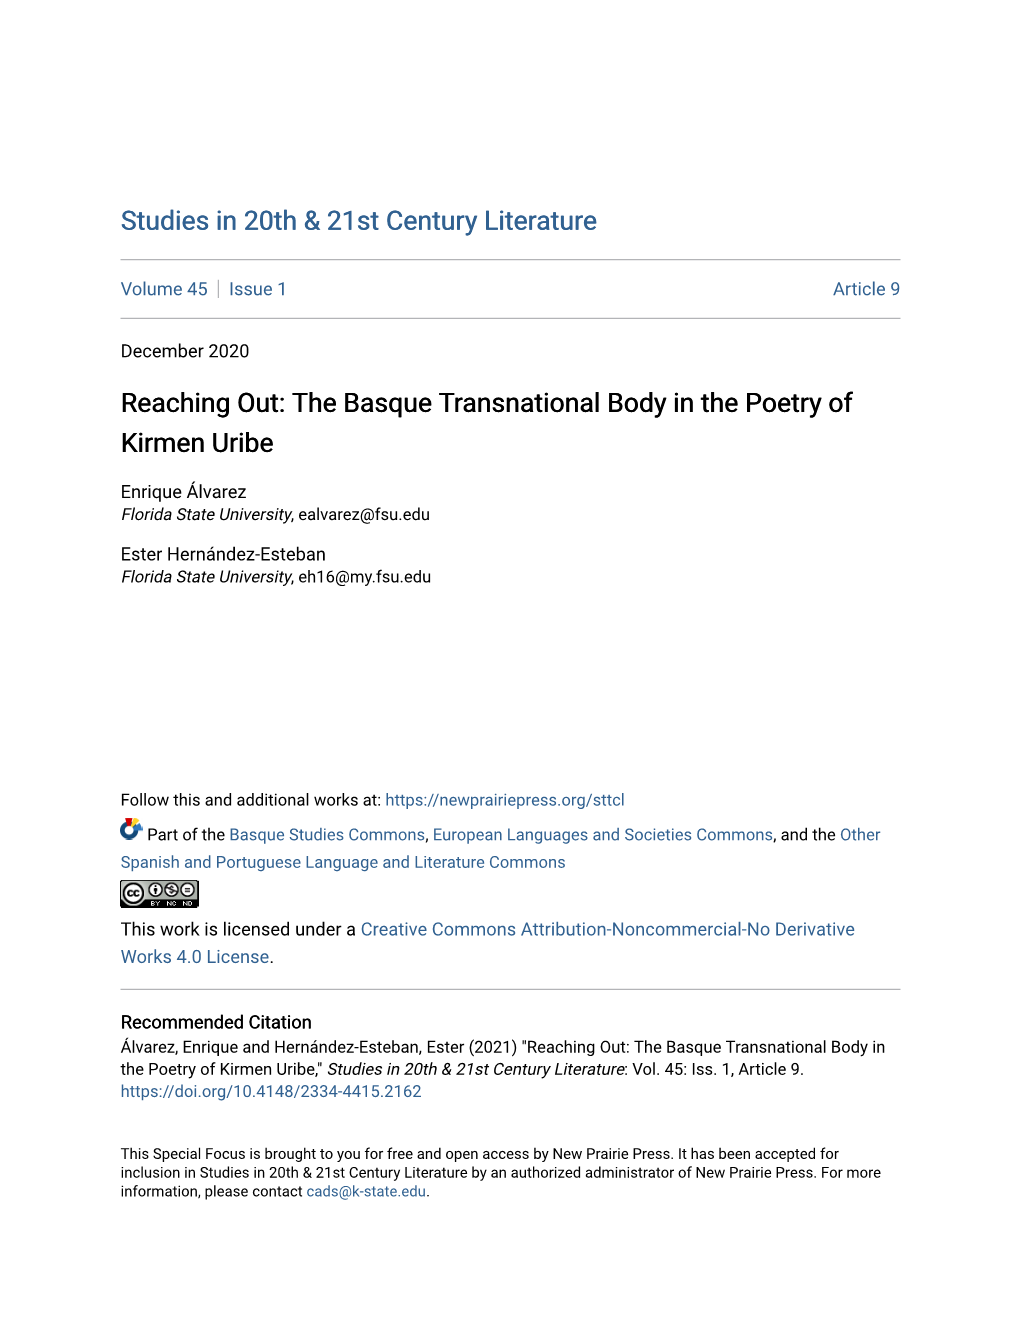 The Basque Transnational Body in the Poetry of Kirmen Uribe